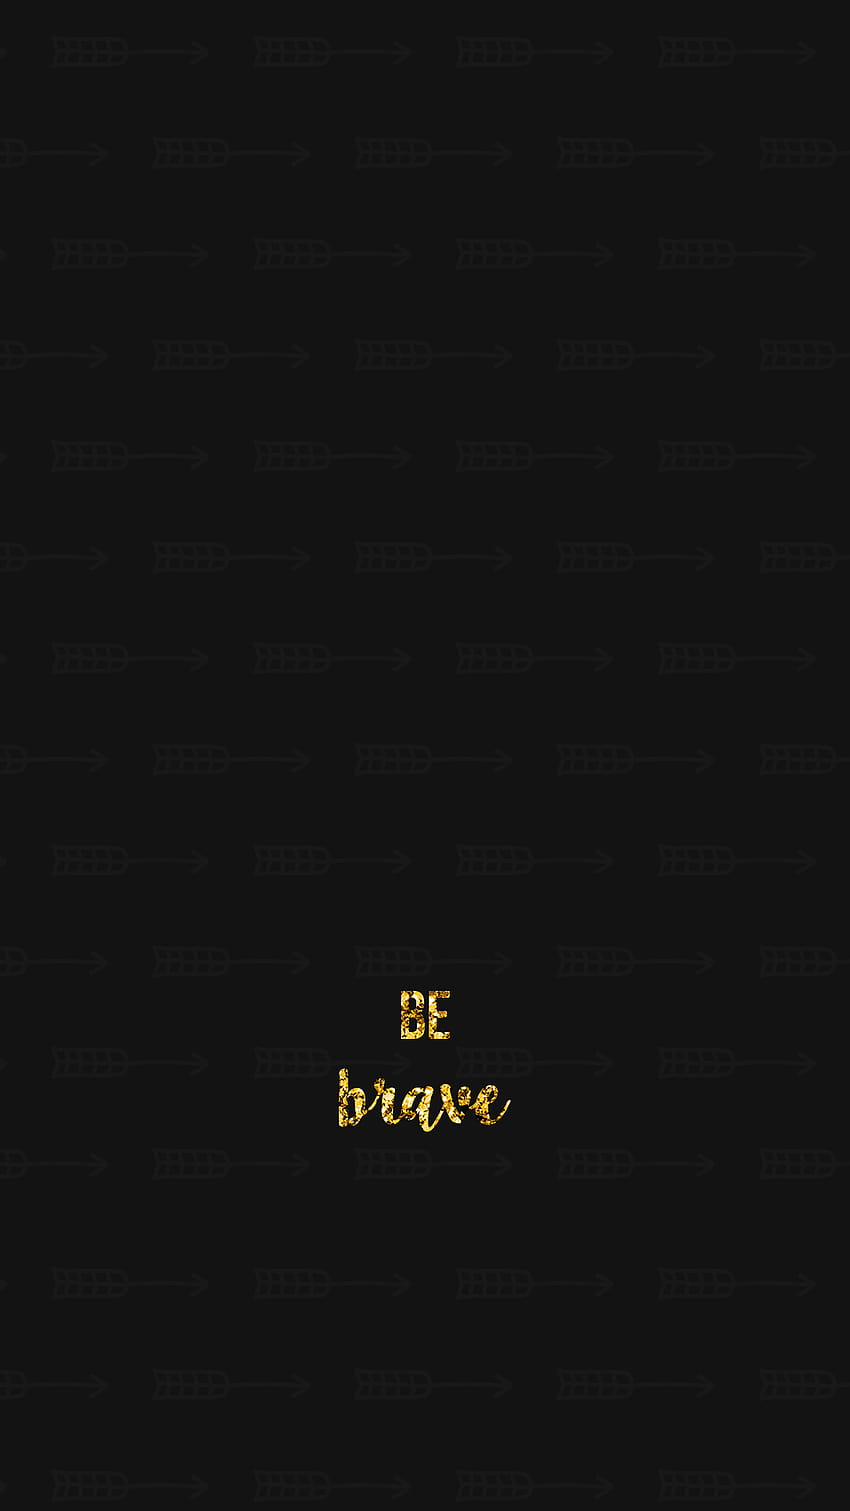 Gold Dark Background  IPhone Wallpapers  iPhone Wallpapers